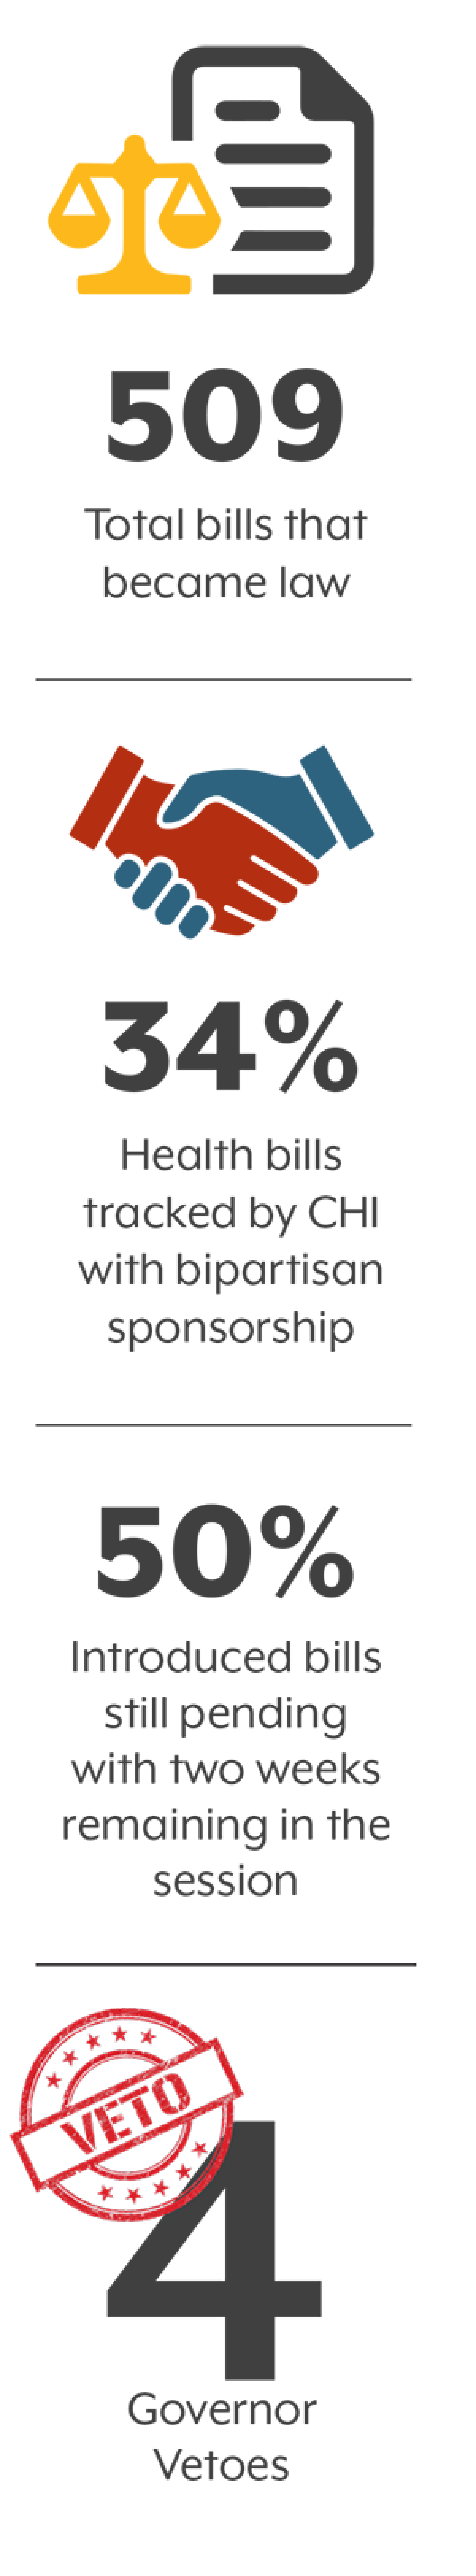 Graphics showing 2022 legislative stats: 509 bills became law, 34 health bills with bipartisan sponsorship, 50% of bills still active in last two weeks of session, 4 vetoes